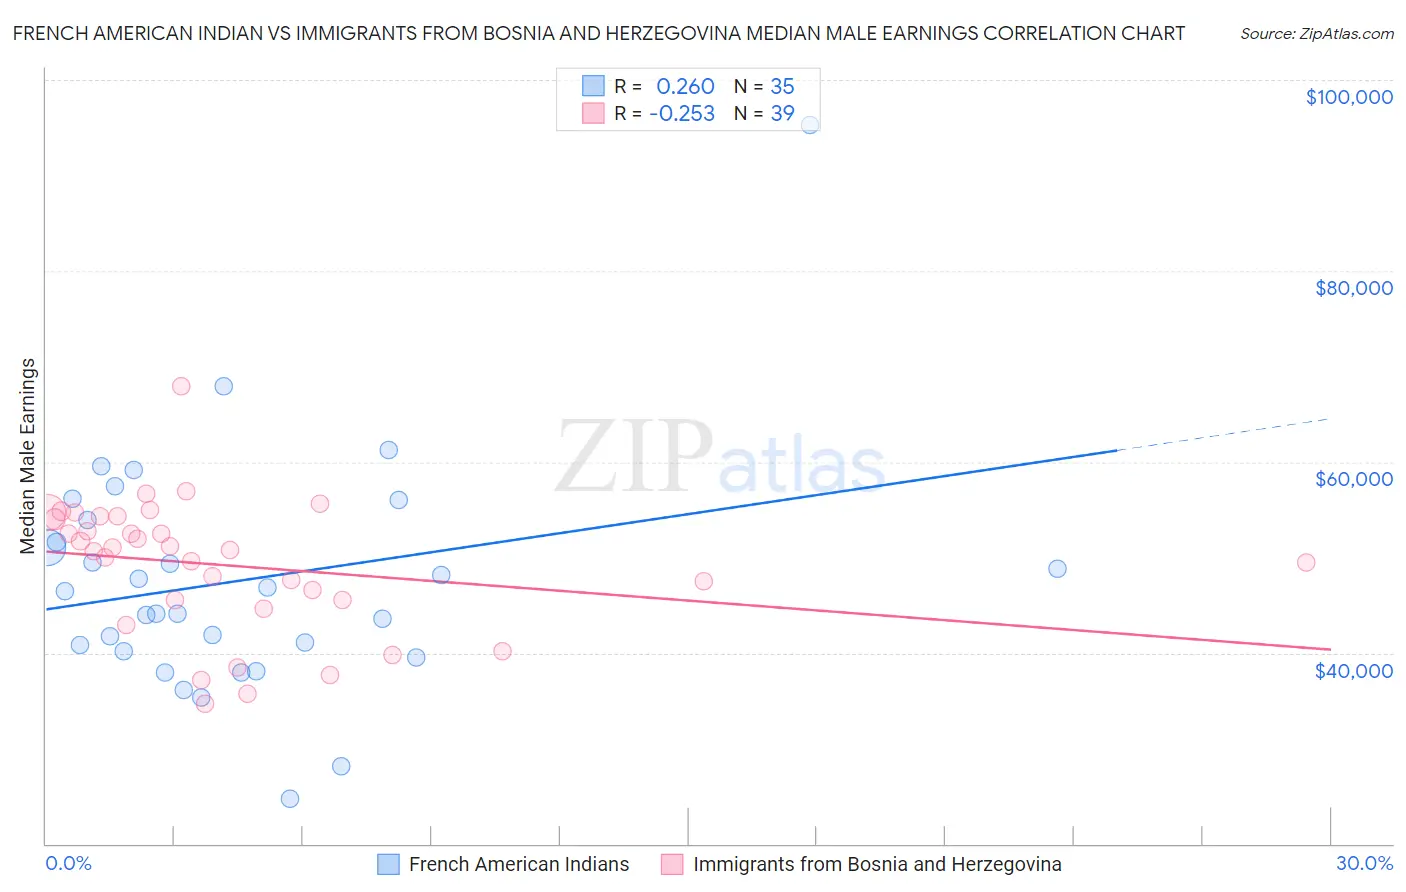 French American Indian vs Immigrants from Bosnia and Herzegovina Median Male Earnings